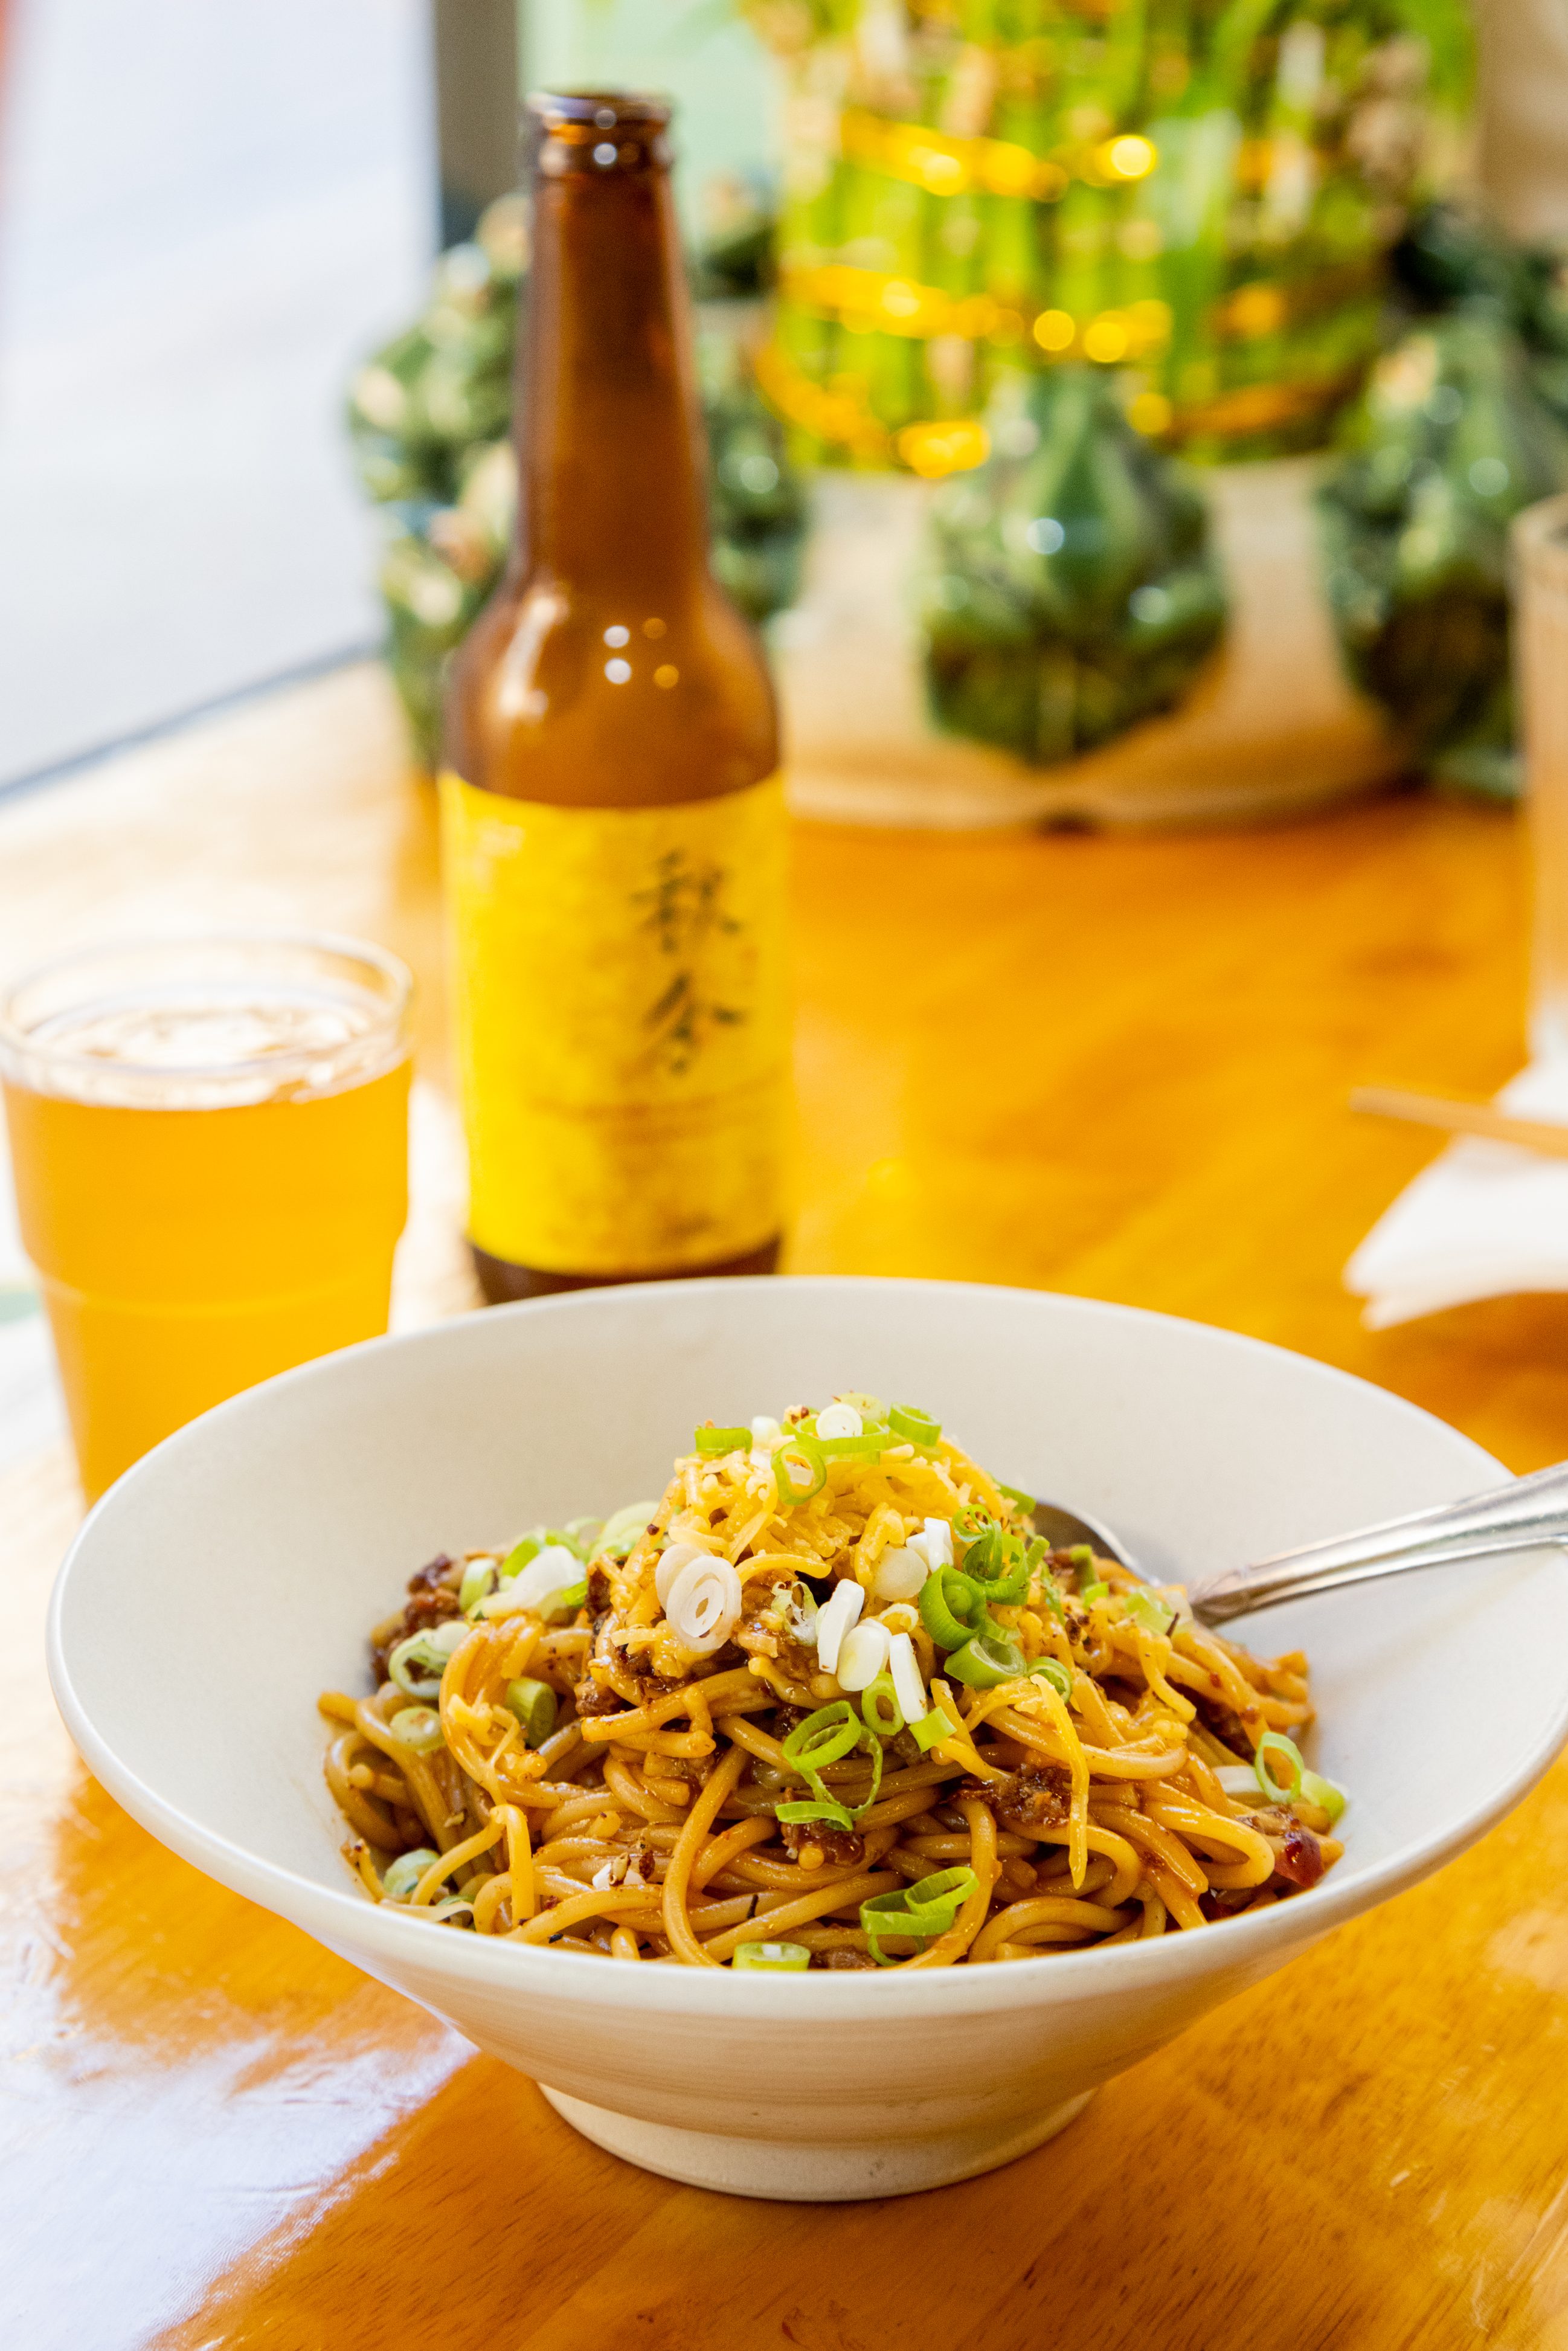 A bowl of noodles garnished with green onions beside a beer bottle and glass. Blurred plants in the background.